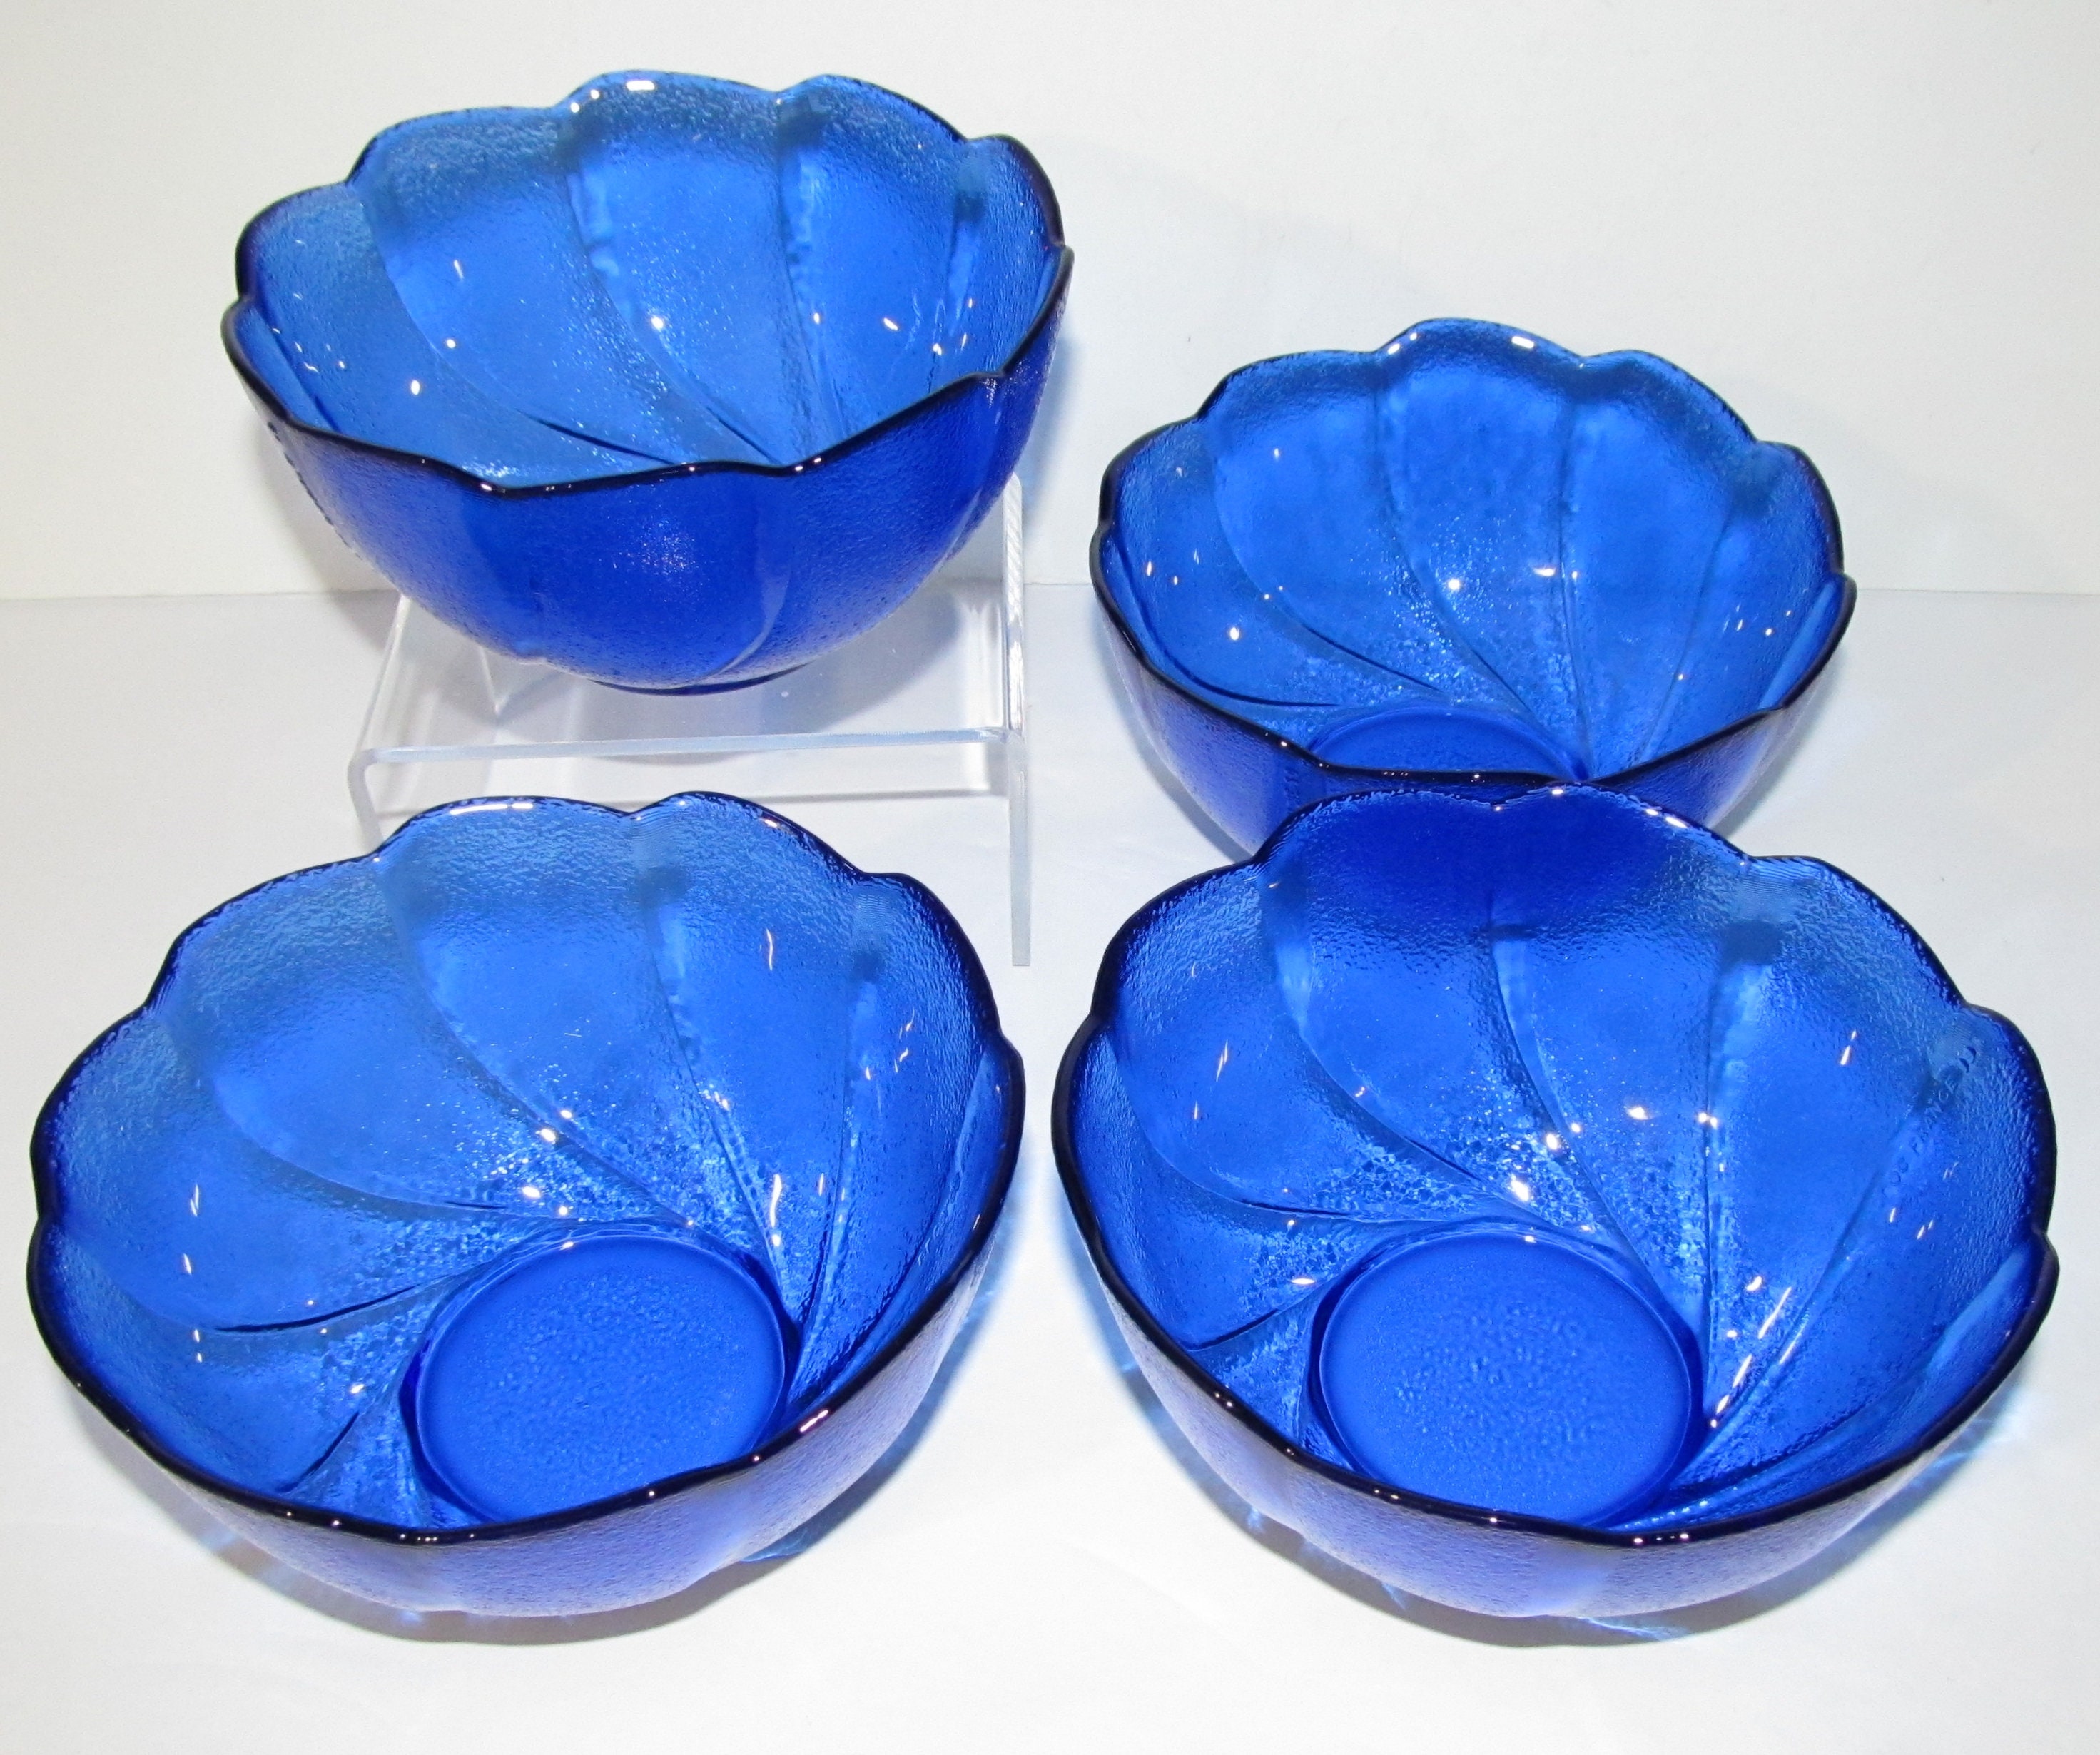 Vintage Indonesia Glass Nesting Bowl Set, 4 Serving Bowls, Swirl Flower,  Swirl Swoosh Pattern, Retro Snack Bowls, Clear Glass, Dinner Party 